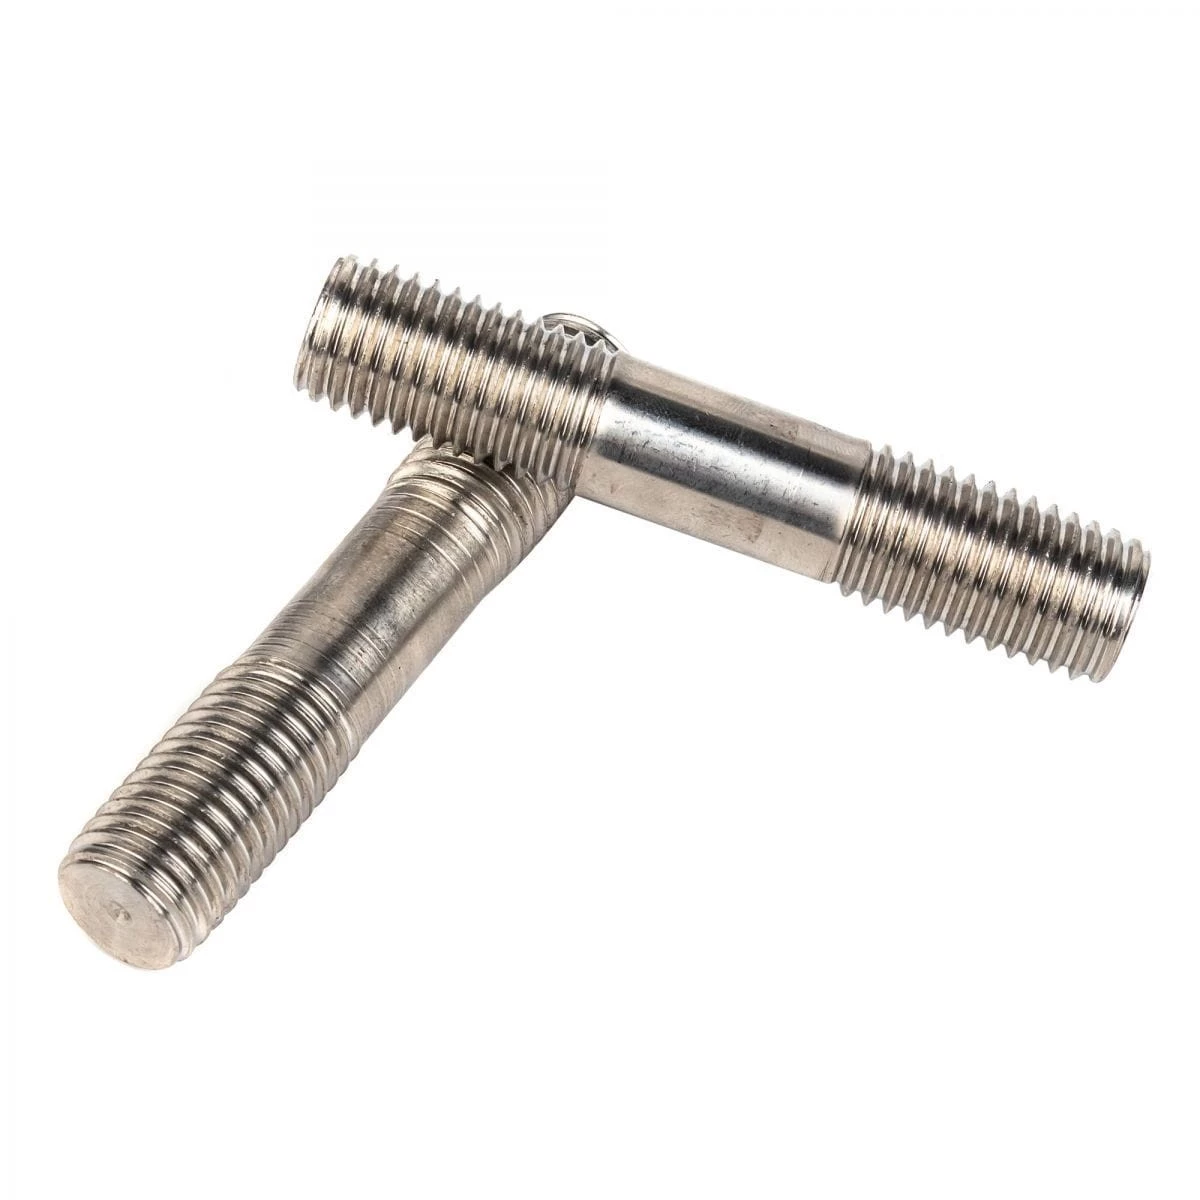 Stainless Steel 316 Stud, 3/4 IN, 10 UNC, Double End Thread